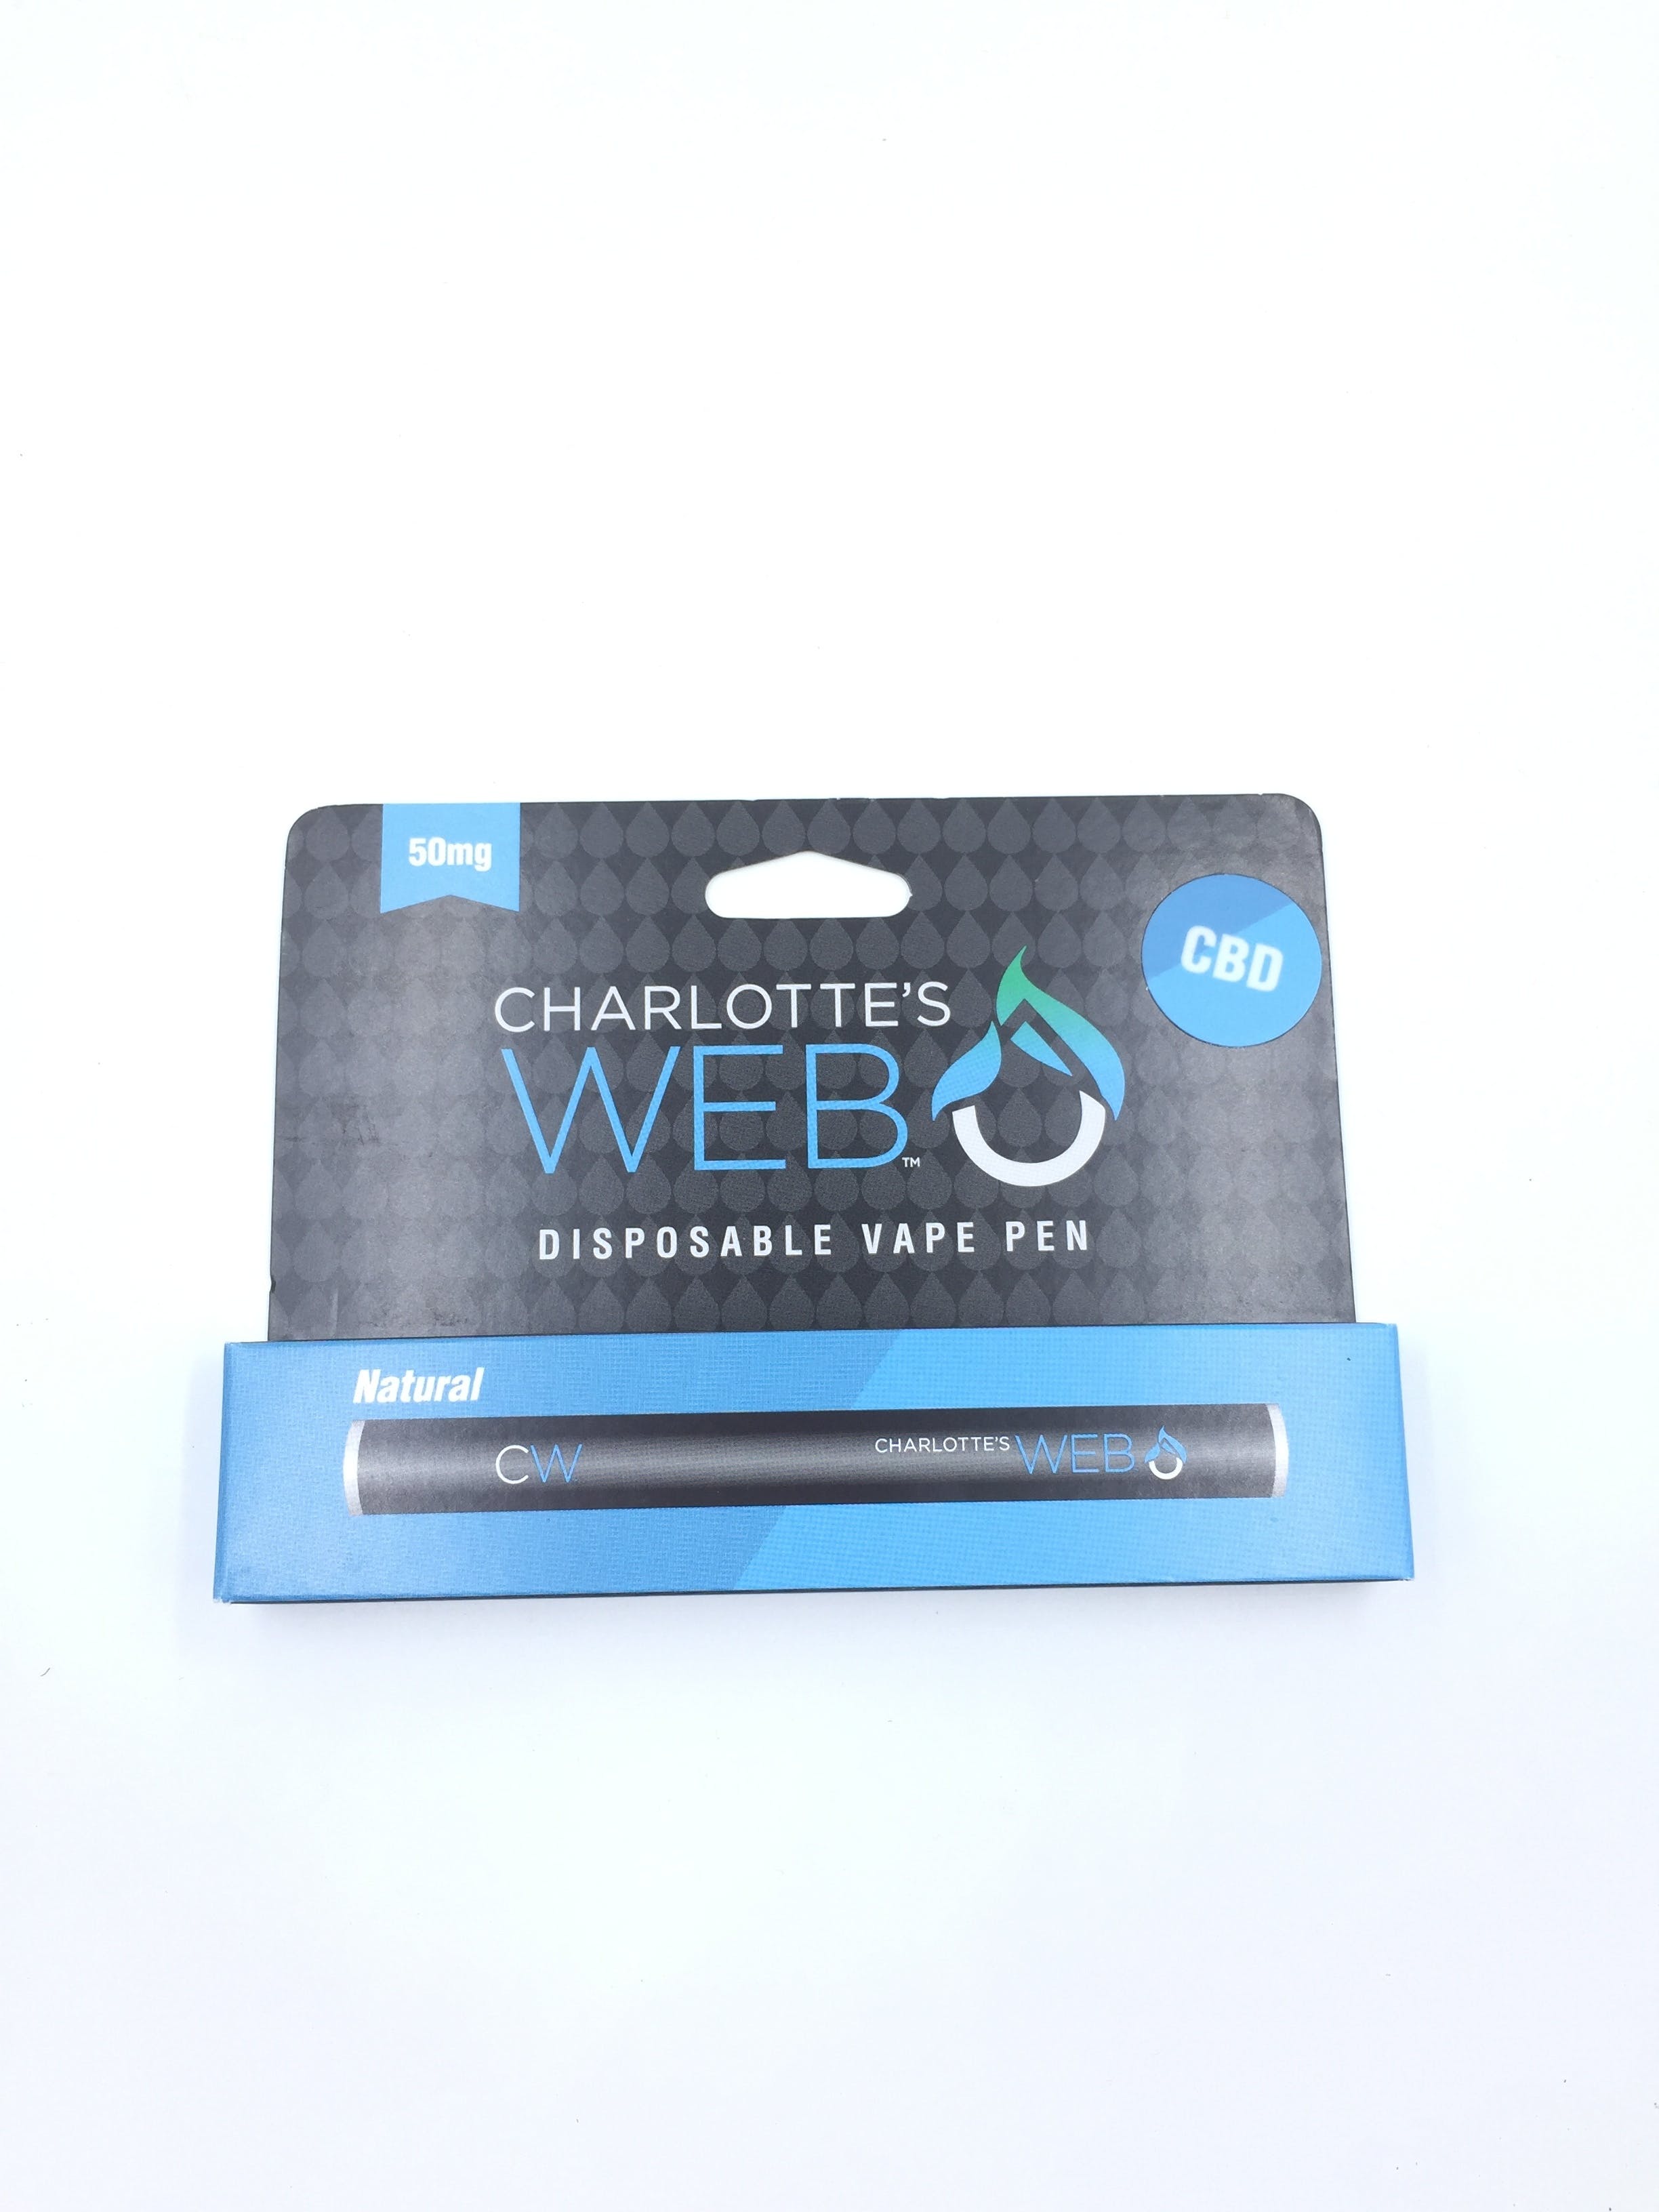 concentrate-charlottes-wed-disposable-cbd-vape-pen-50mg